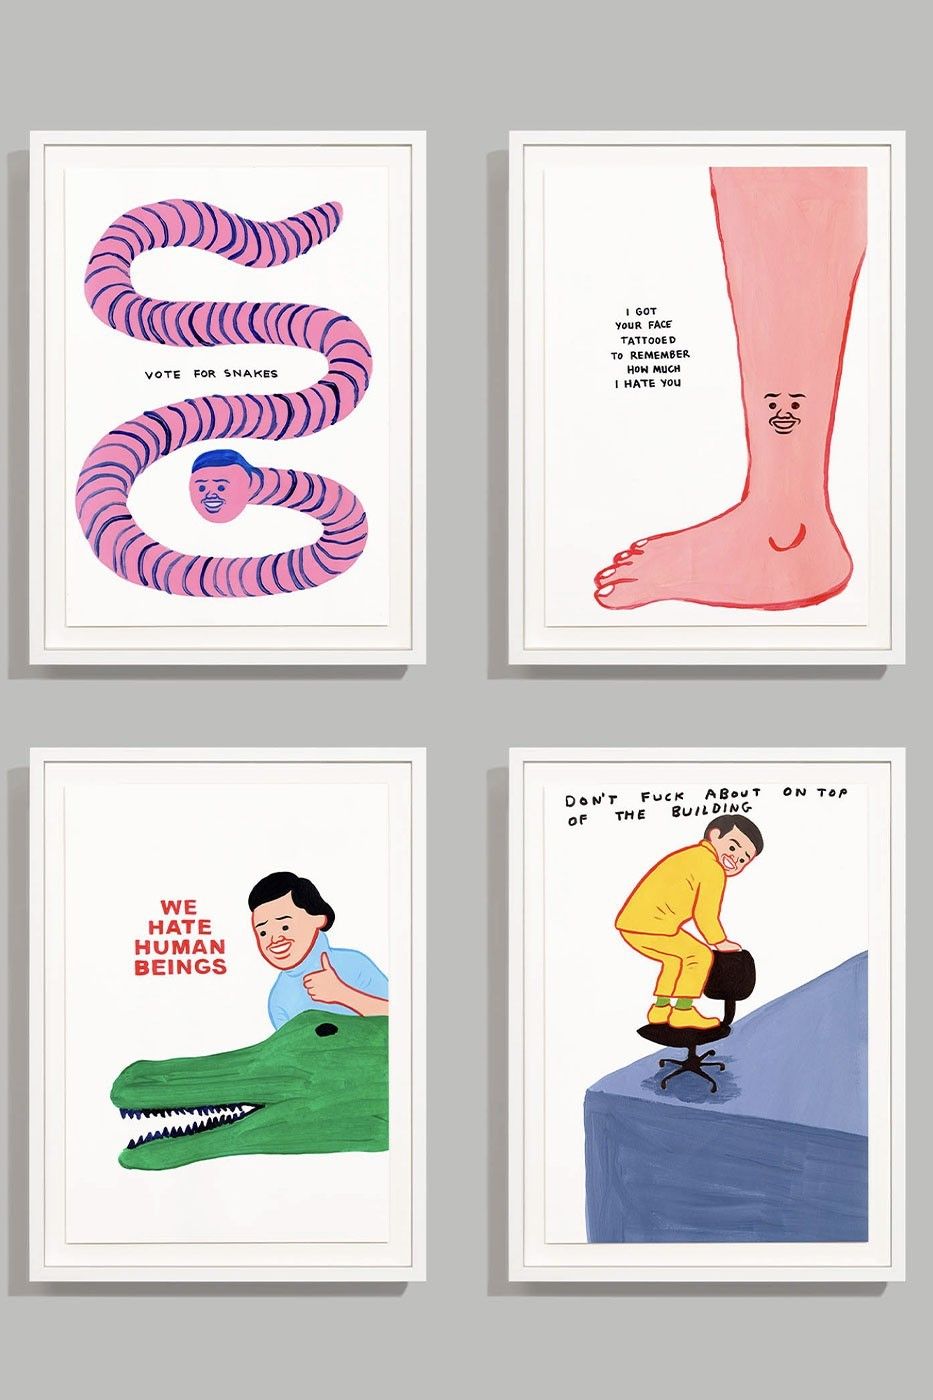 The First Physical VOTE Exhibition: David Shrigley vs Joan